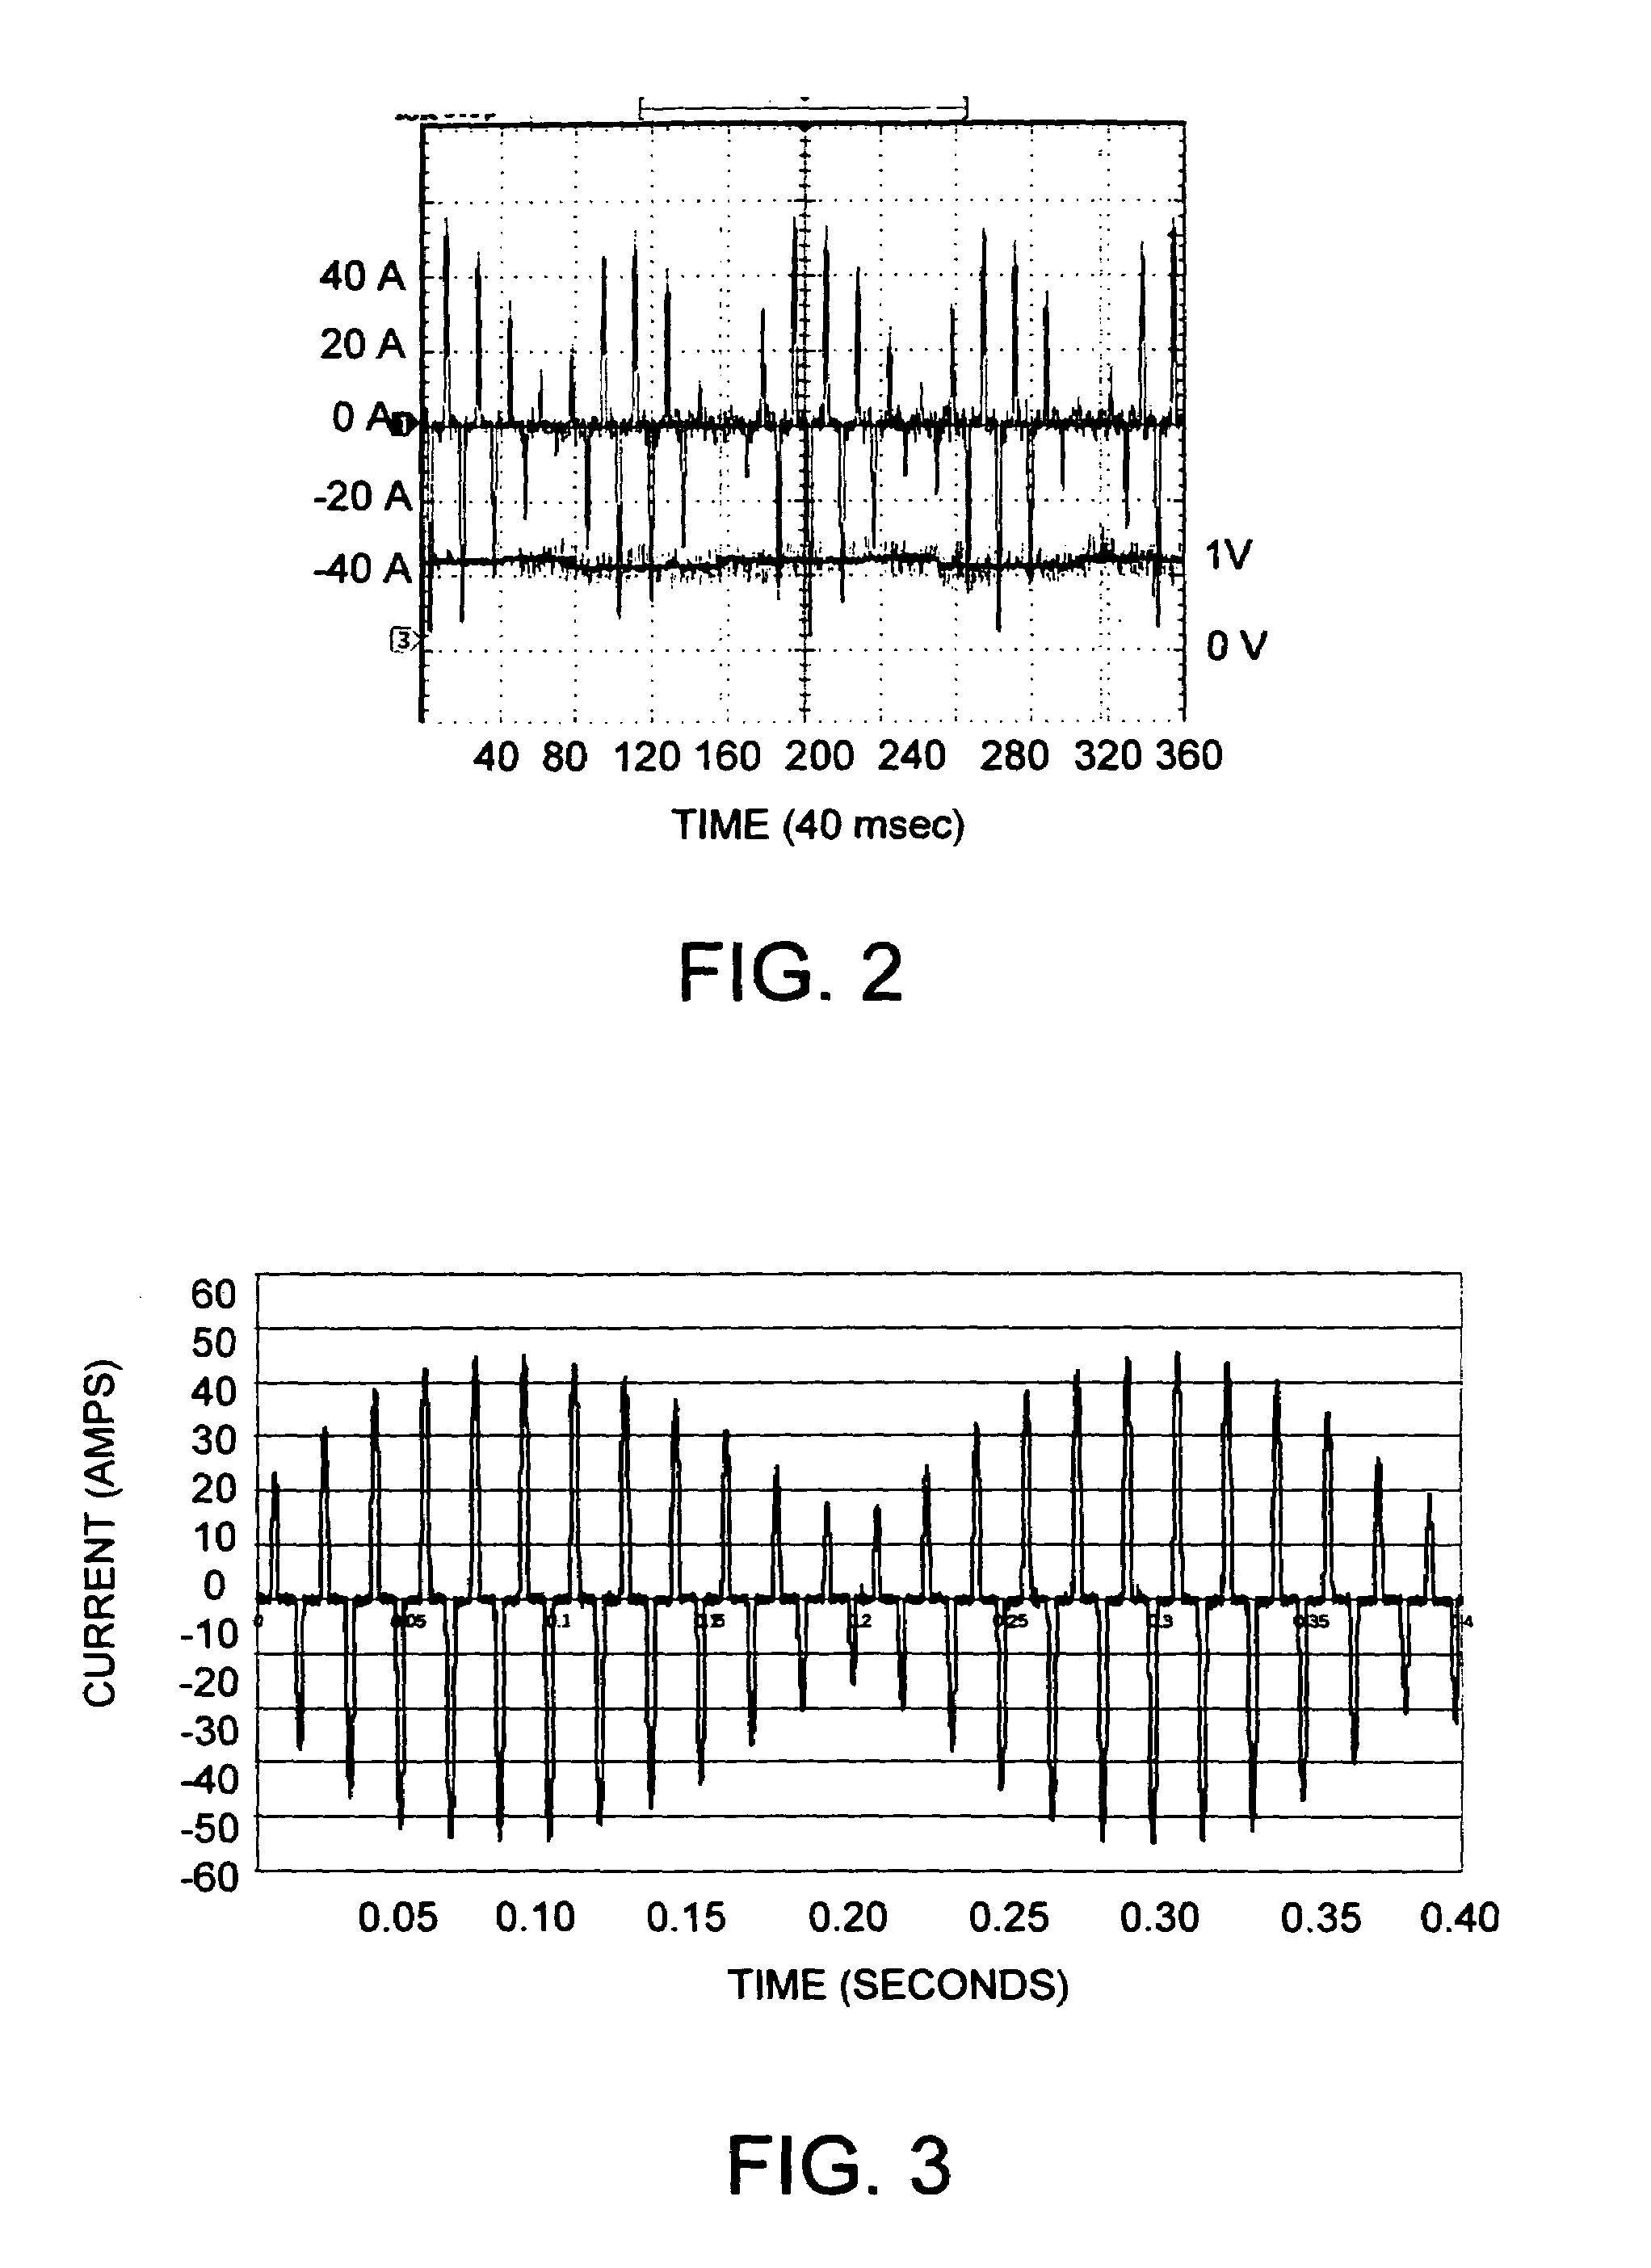 Method for controlling the motor of a pump involving the determination and synchronization of the point of maximum torque with a table of values used to efficiently drive the motor